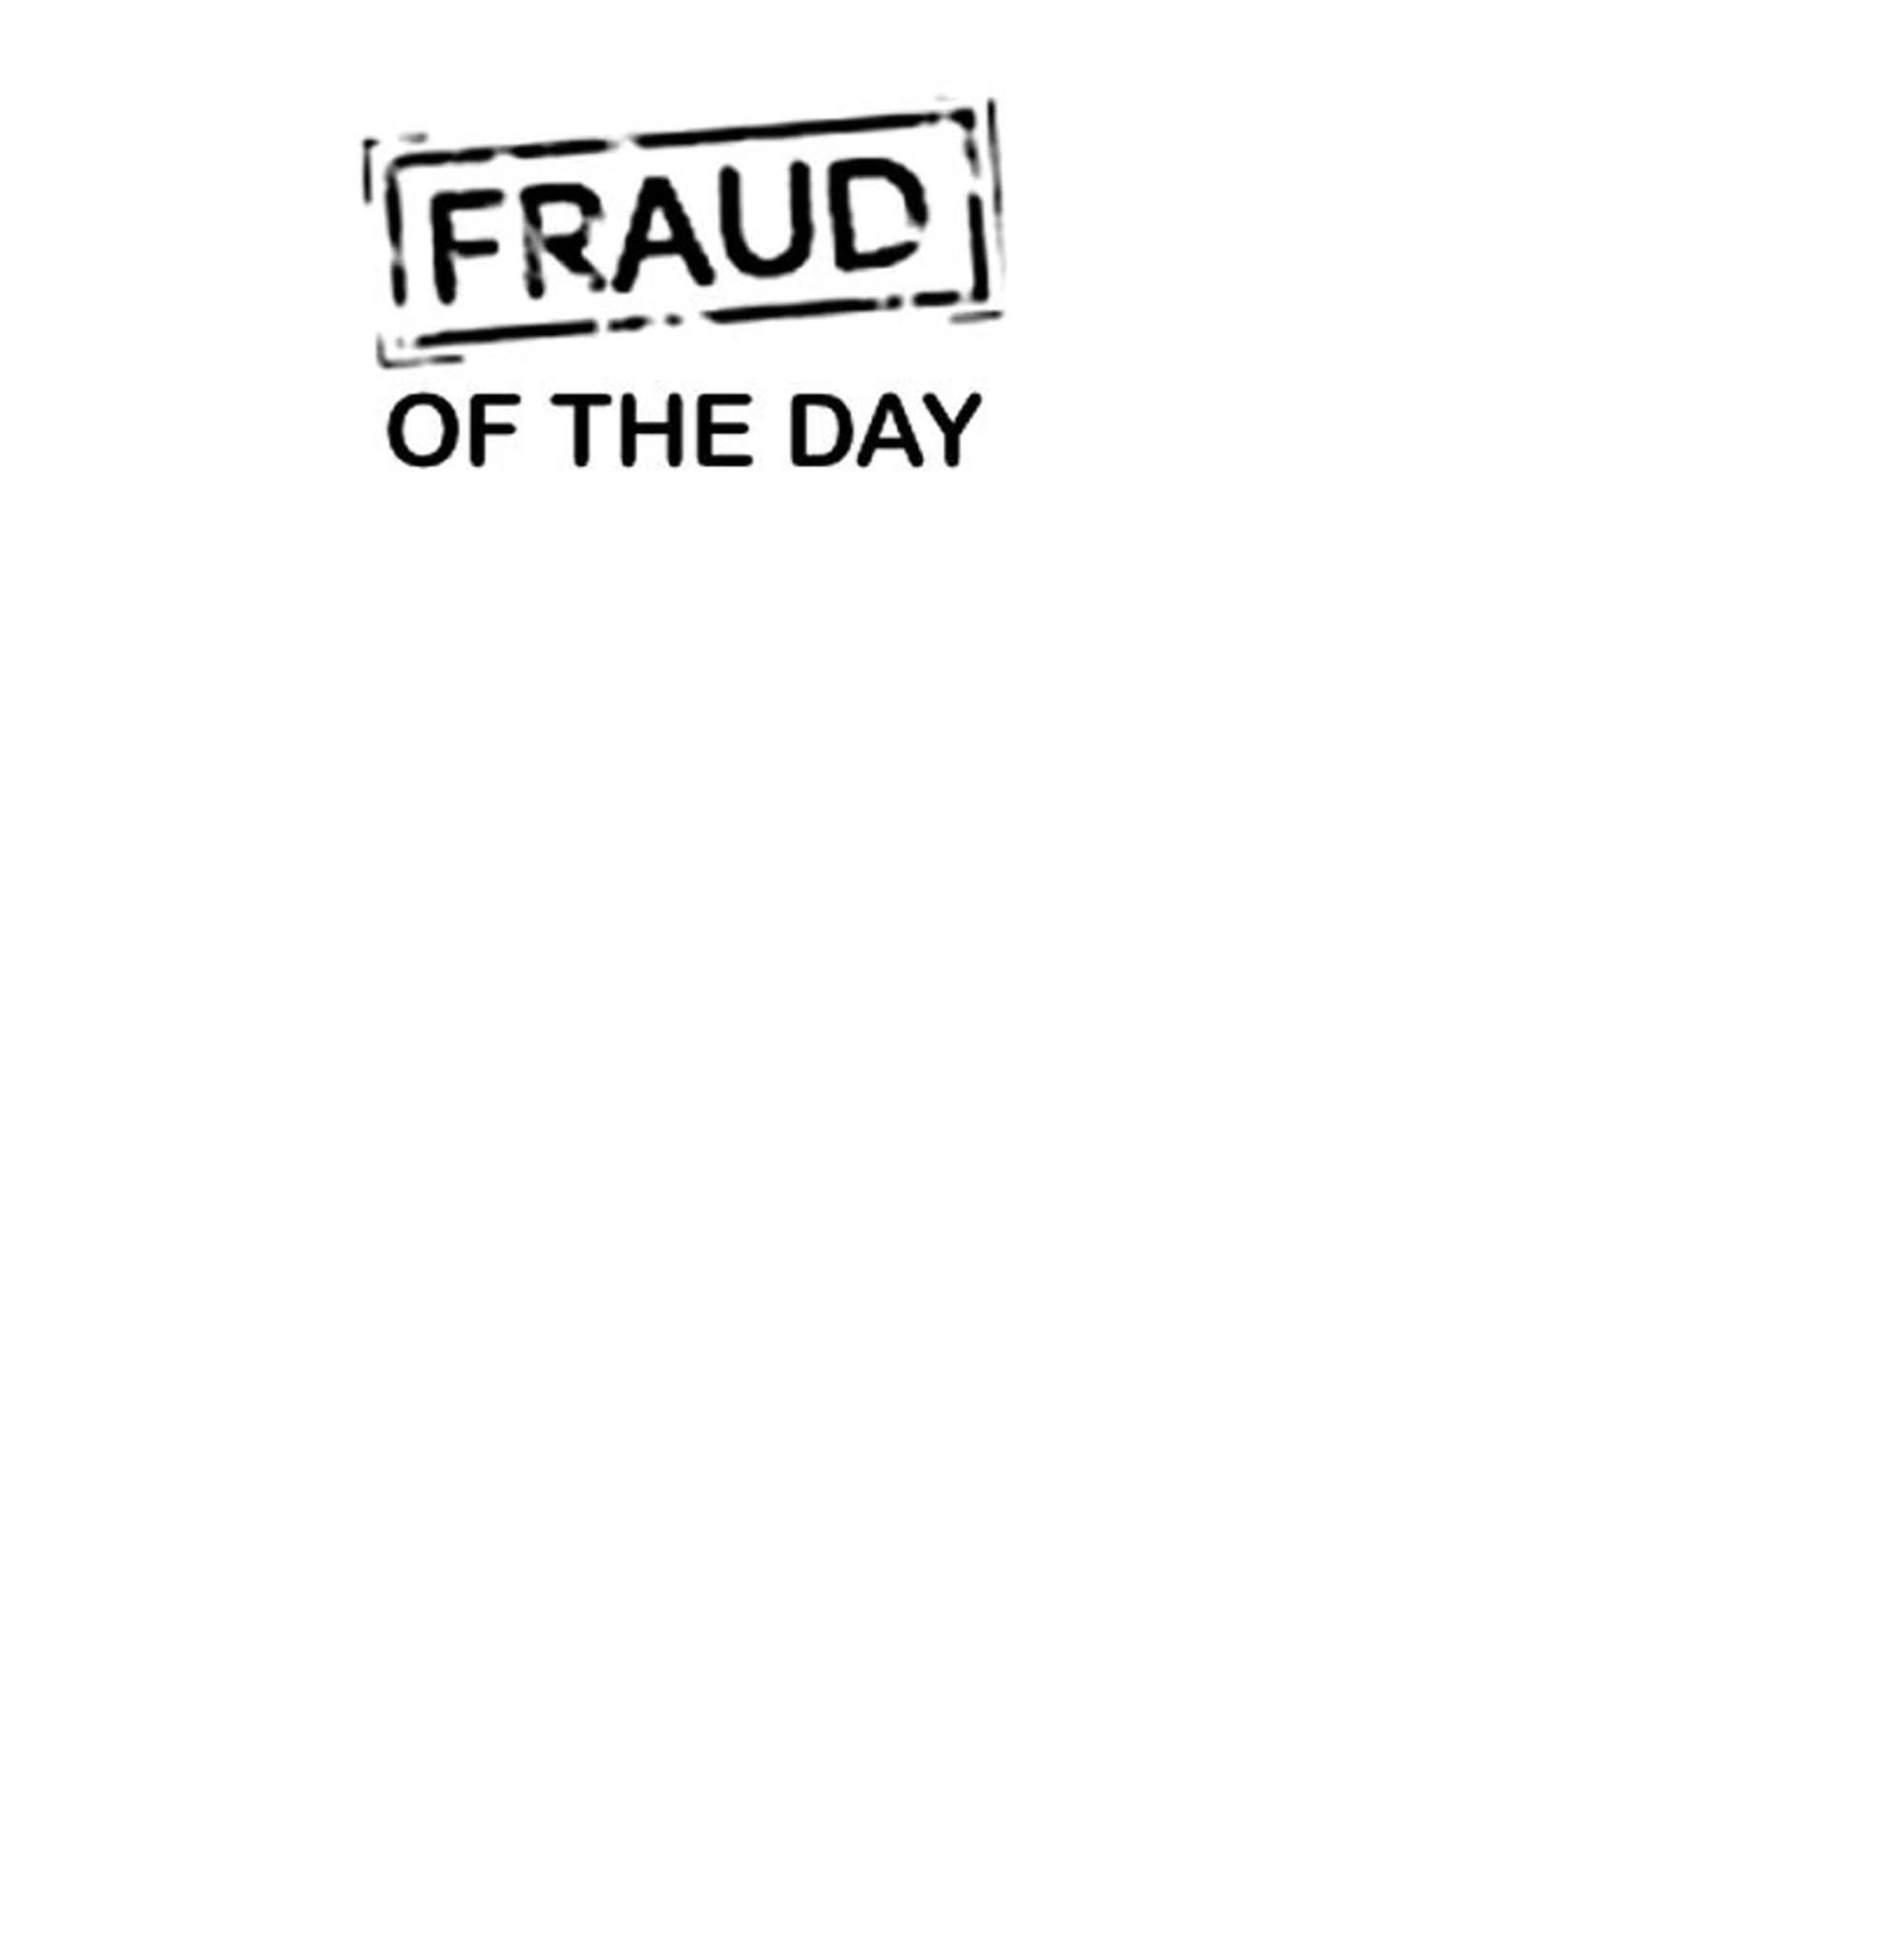 FRAUD OF THE DAY published by Lexis Nexus